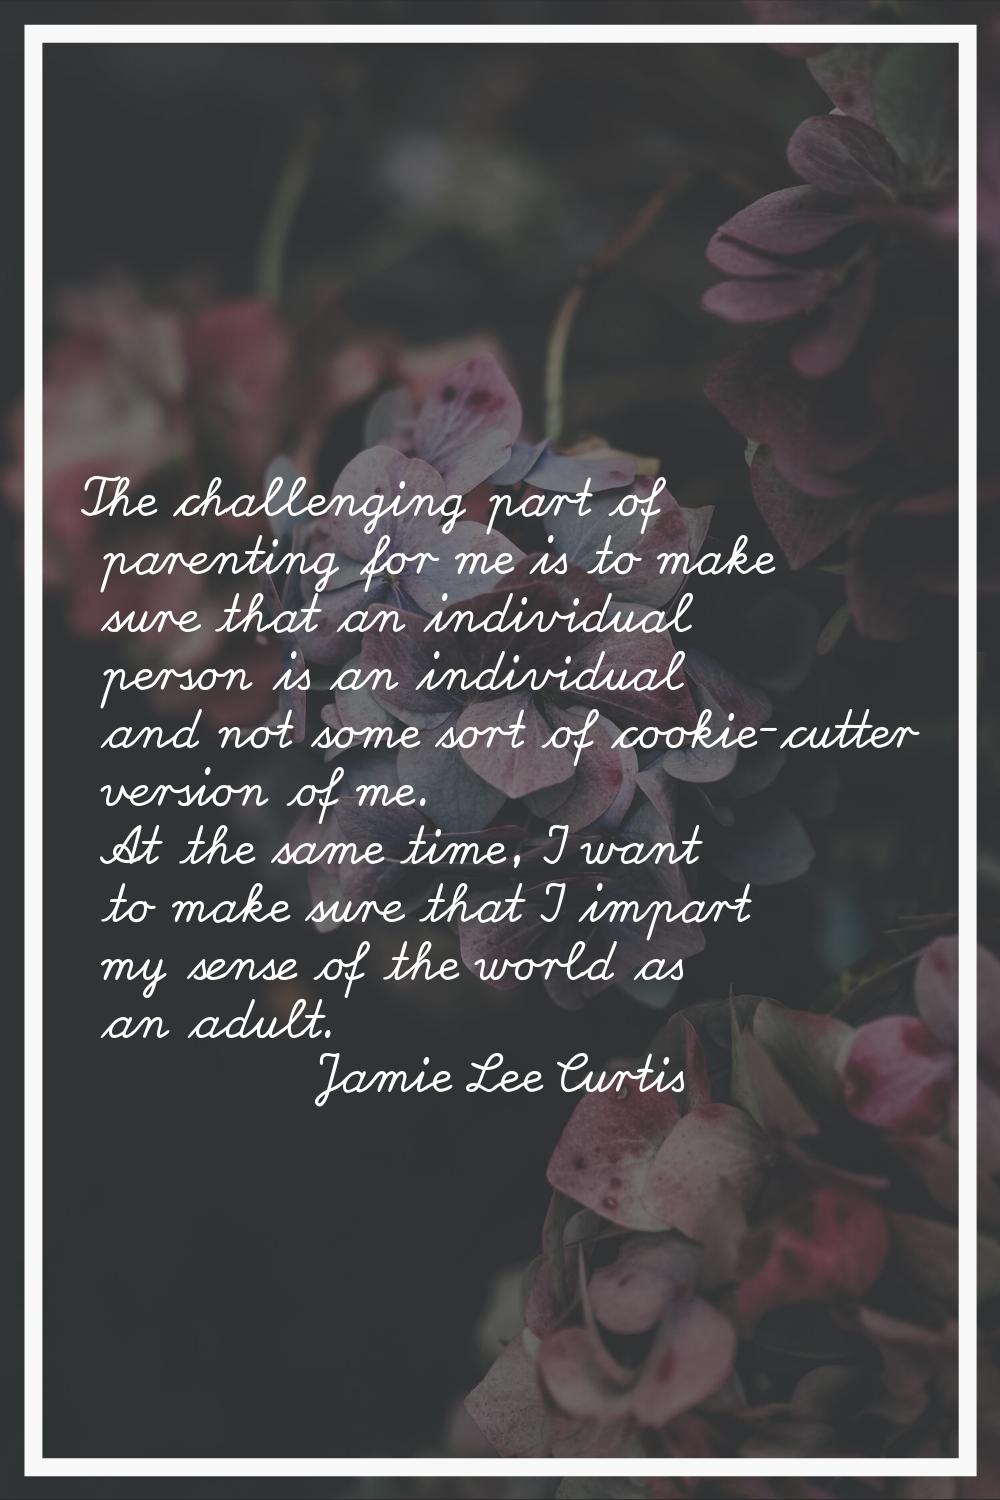 The challenging part of parenting for me is to make sure that an individual person is an individual